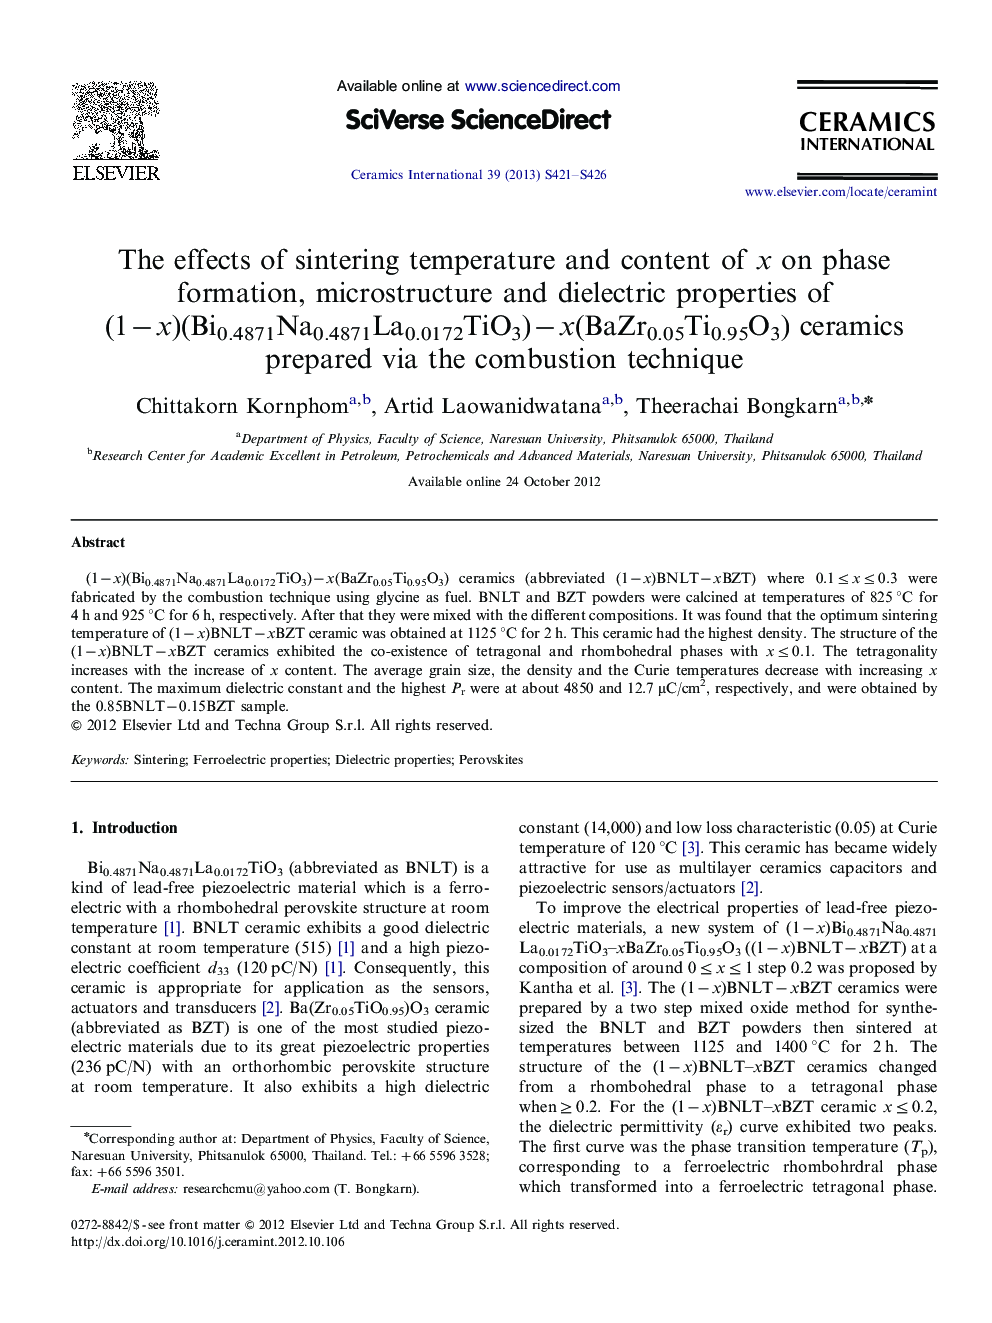 The effects of sintering temperature and content of x on phase formation, microstructure and dielectric properties of (1−x)(Bi0.4871Na0.4871La0.0172TiO3)−x(BaZr0.05Ti0.95O3) ceramics prepared via the combustion technique